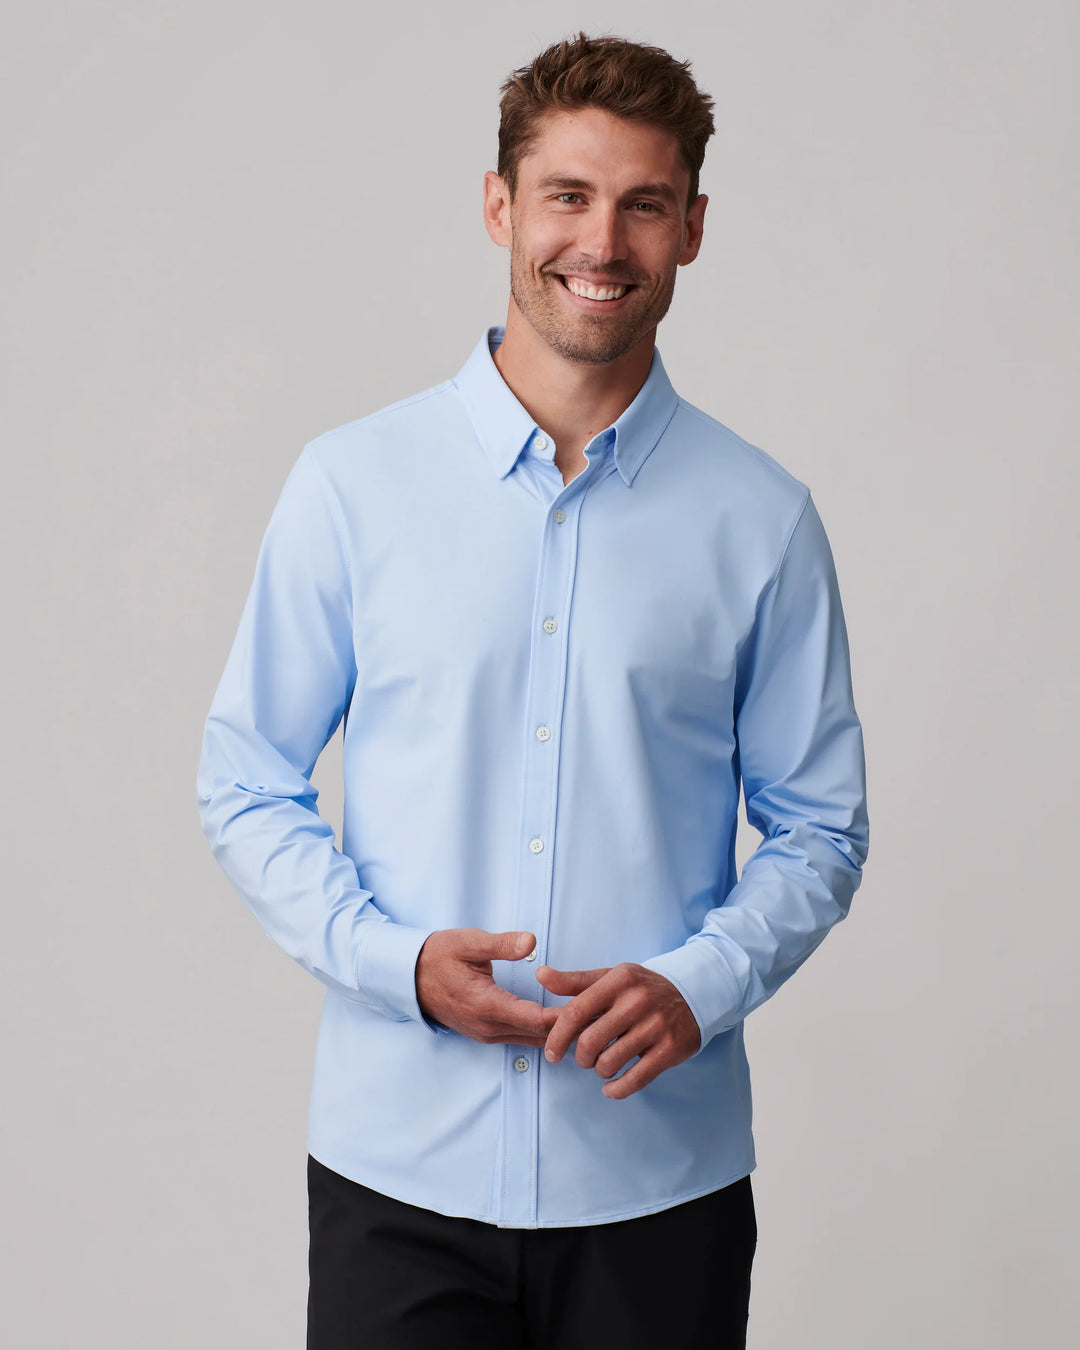 Commuter Shirt - Slim Fit in Business White & Blue